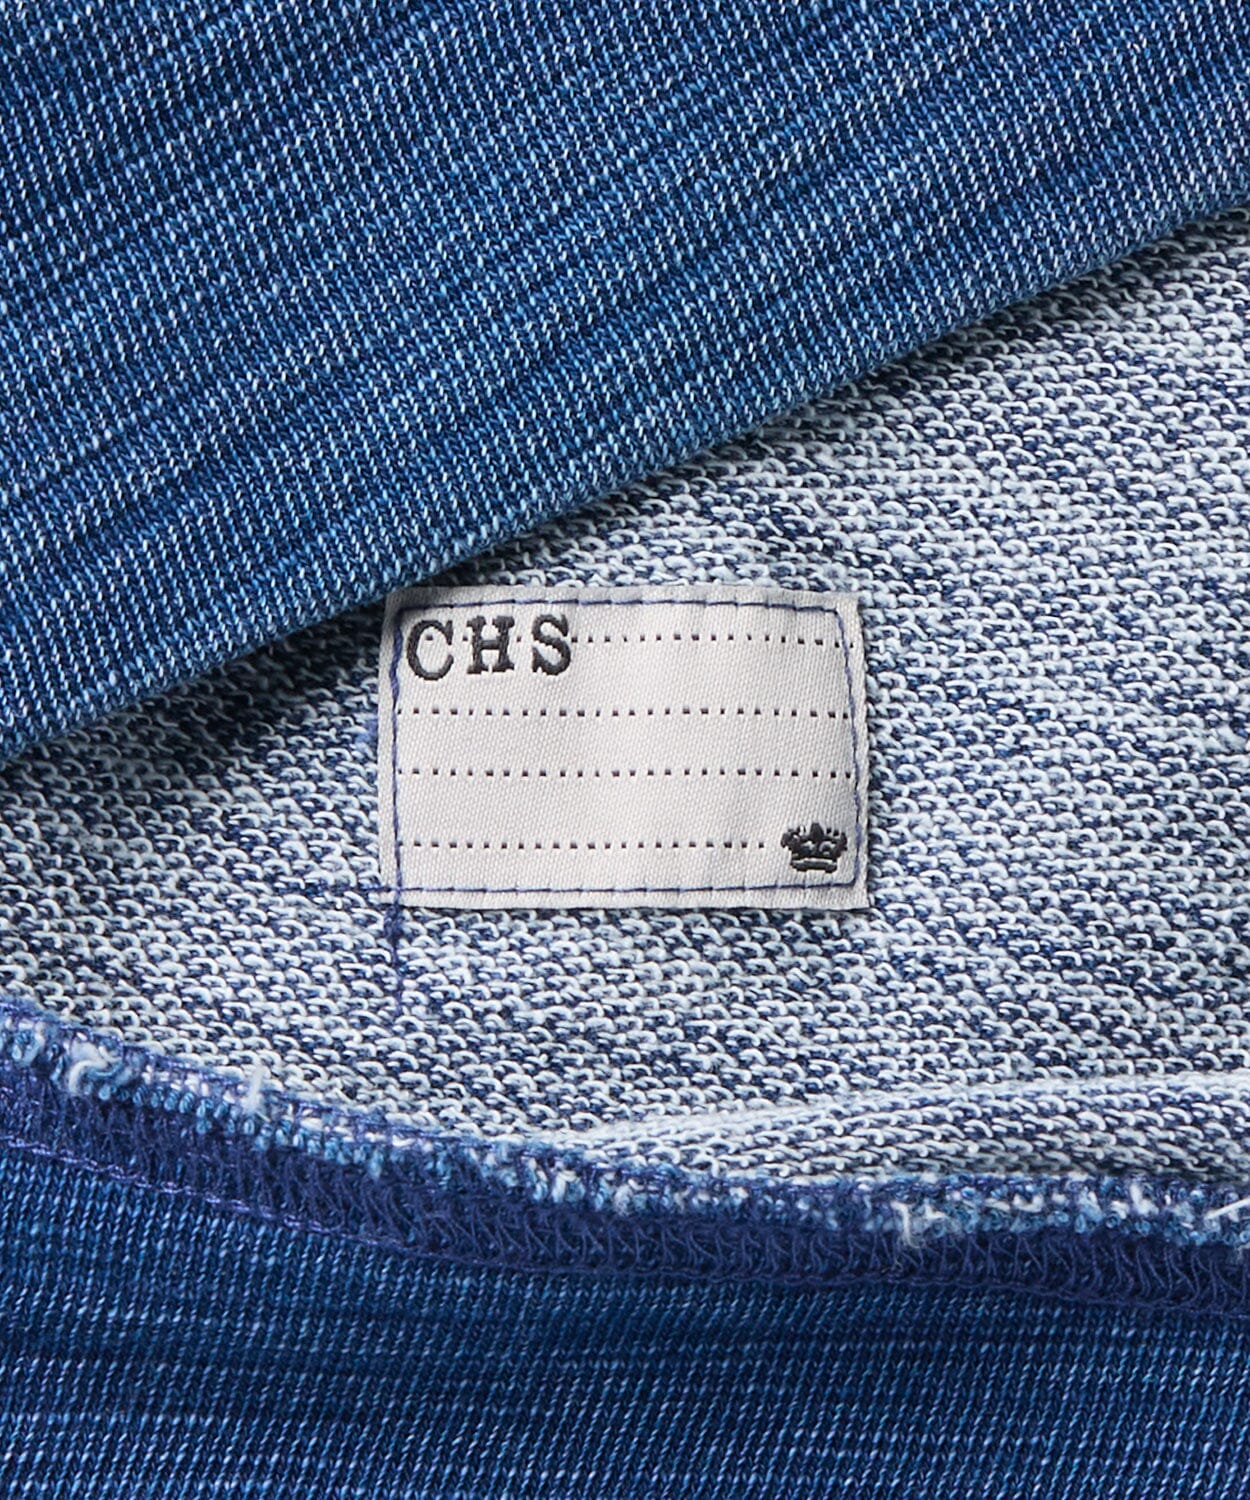 Close up of Hidden Name Label in Interior of Garment